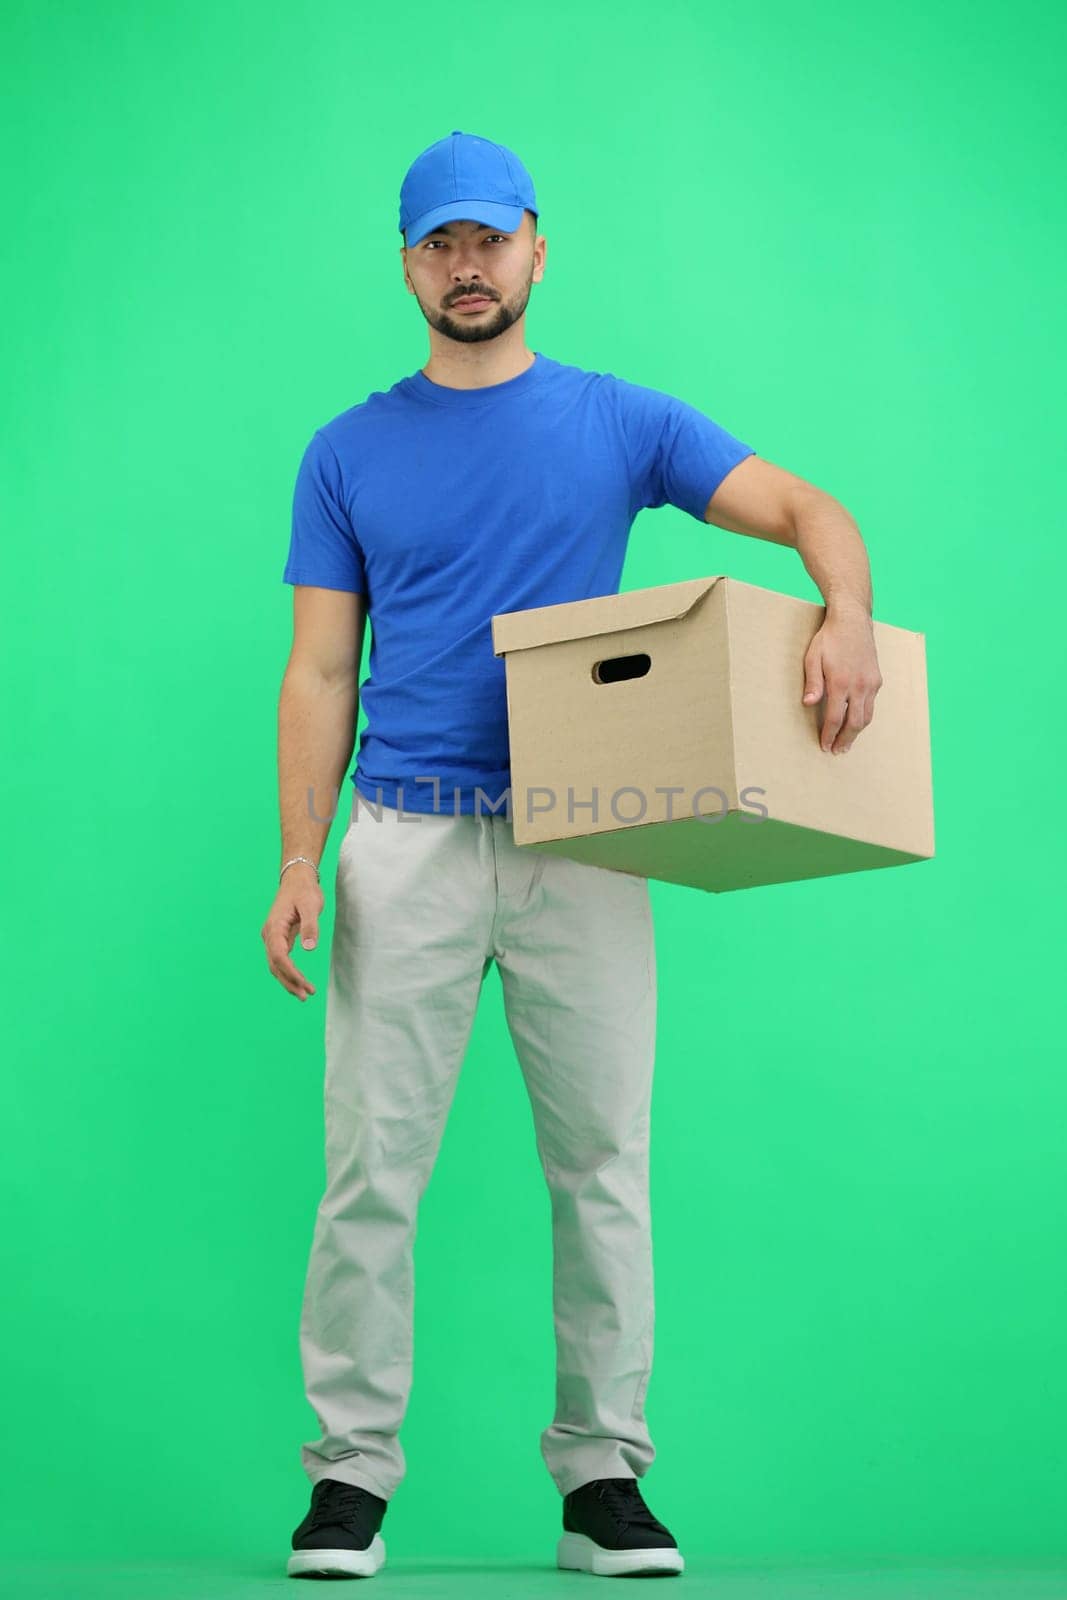 The deliveryman, full-length, on a green background, with a box.